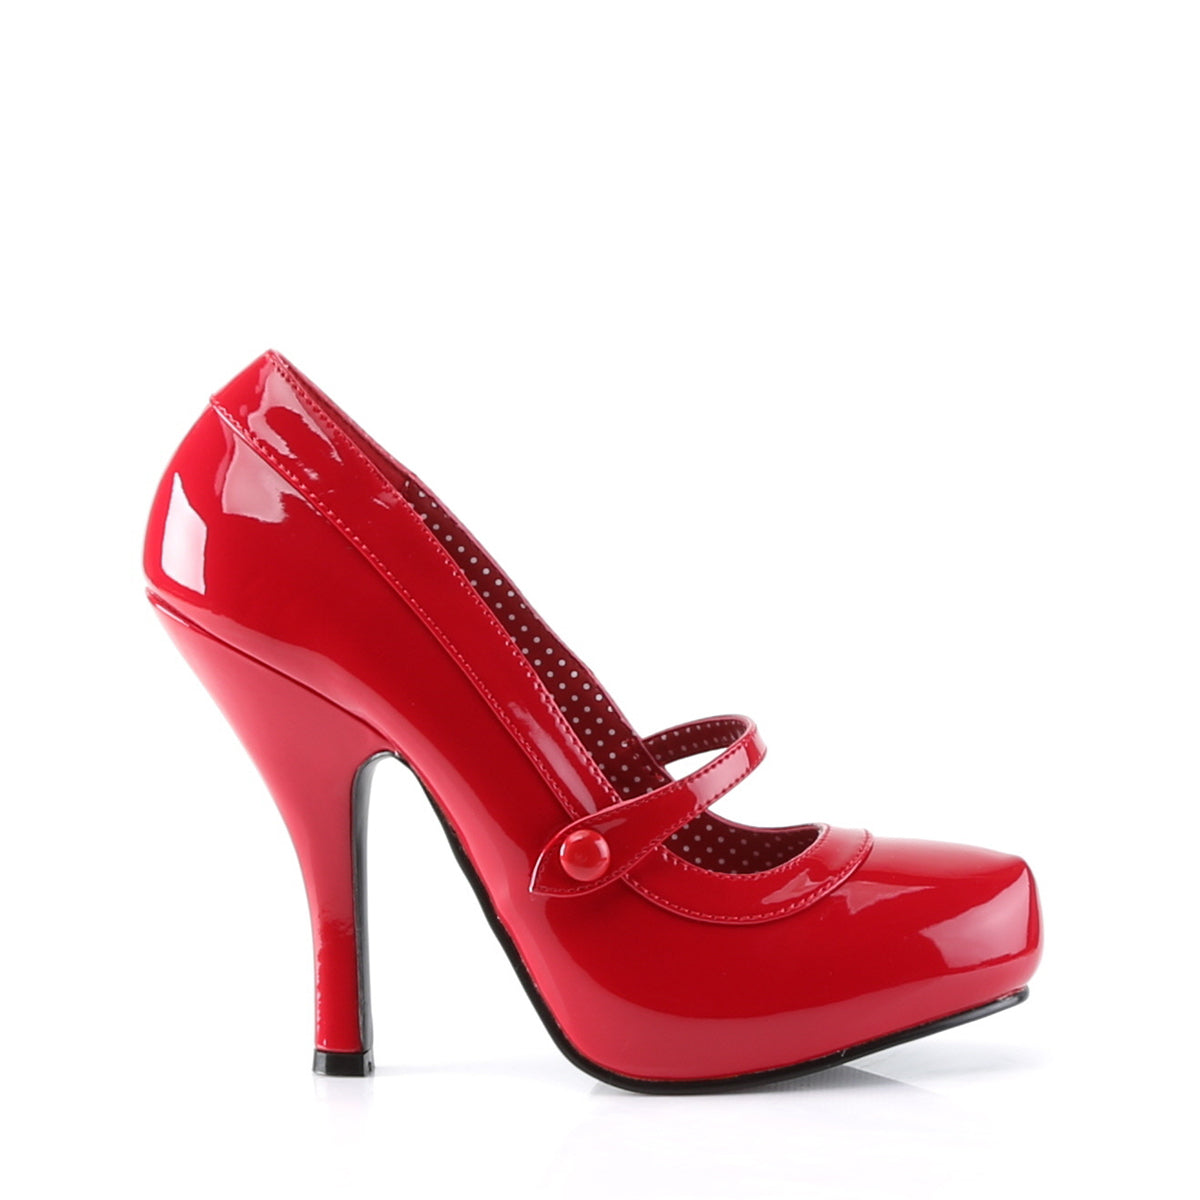 CUTIEPIE-02 Pin Up Couture Red Patent Platforms [Sexy Shoes]